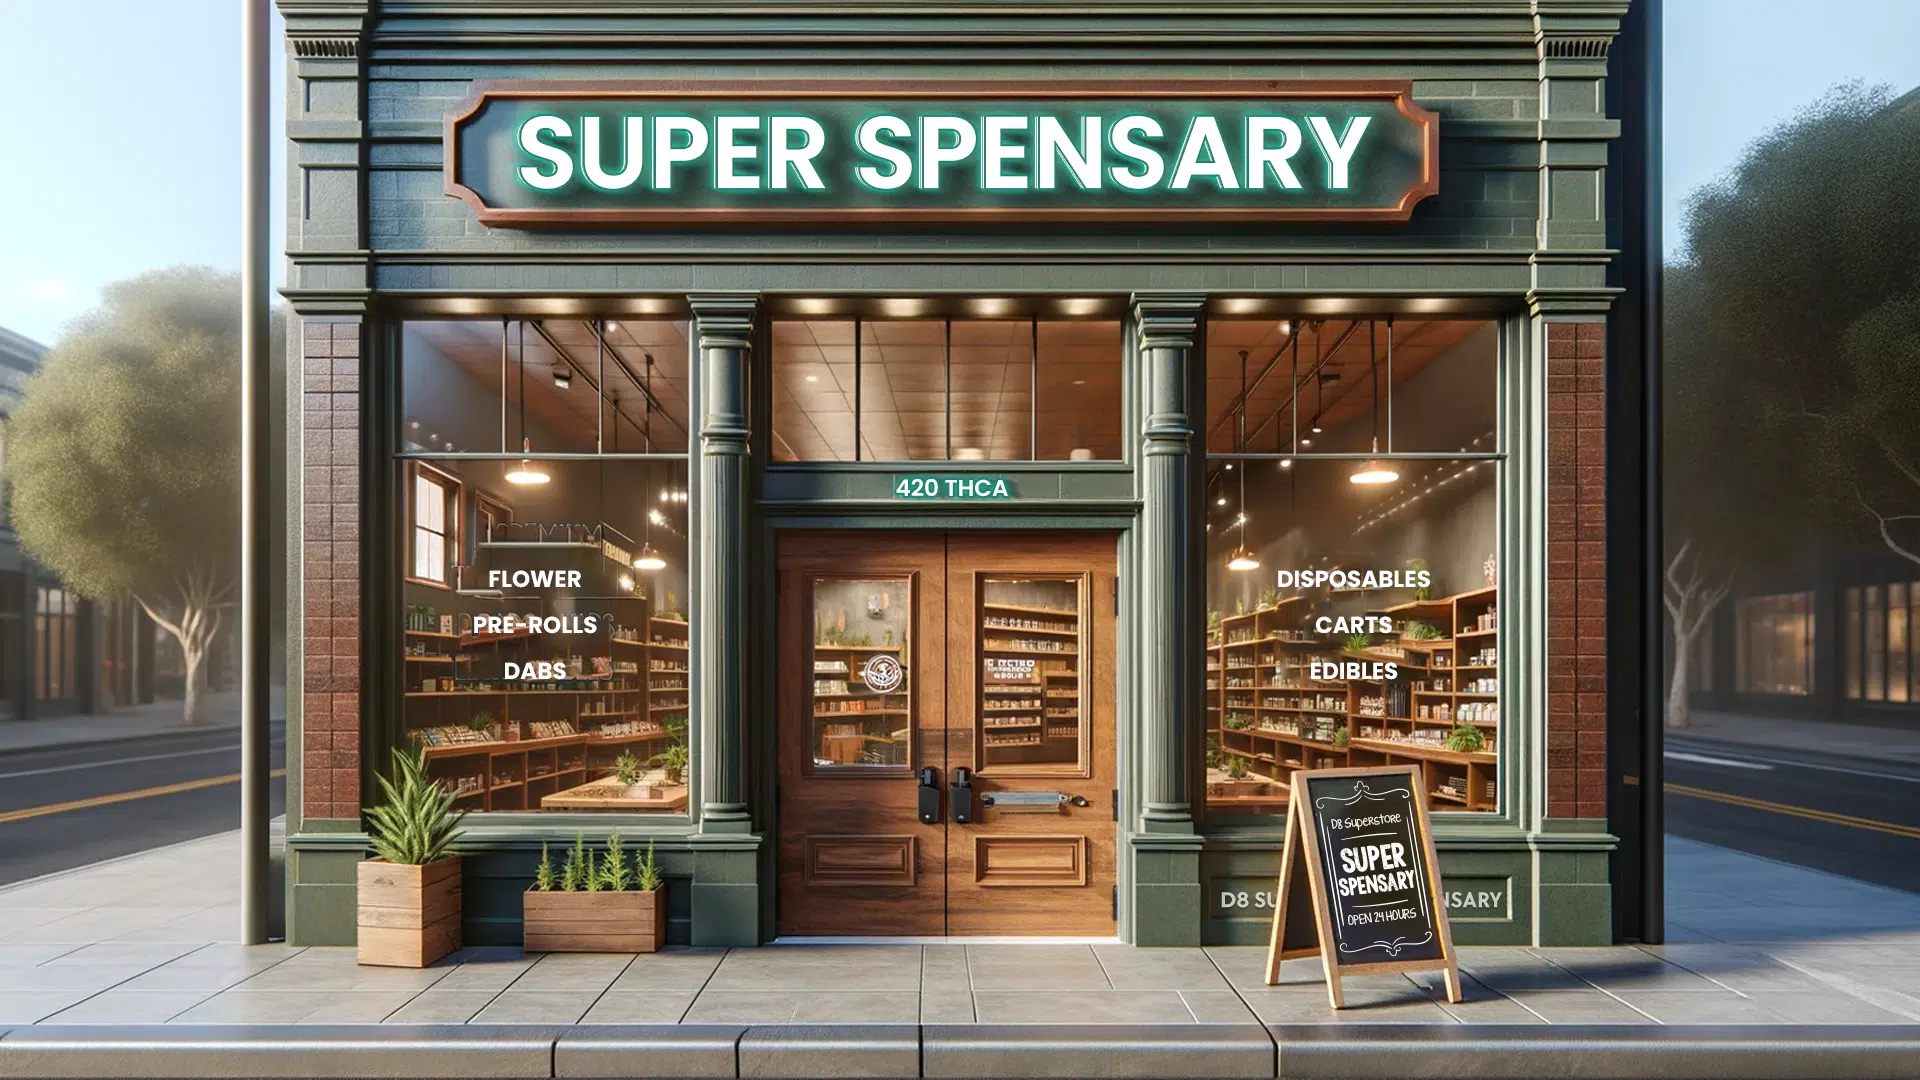 Super Spensary is a marijuana store in a city.